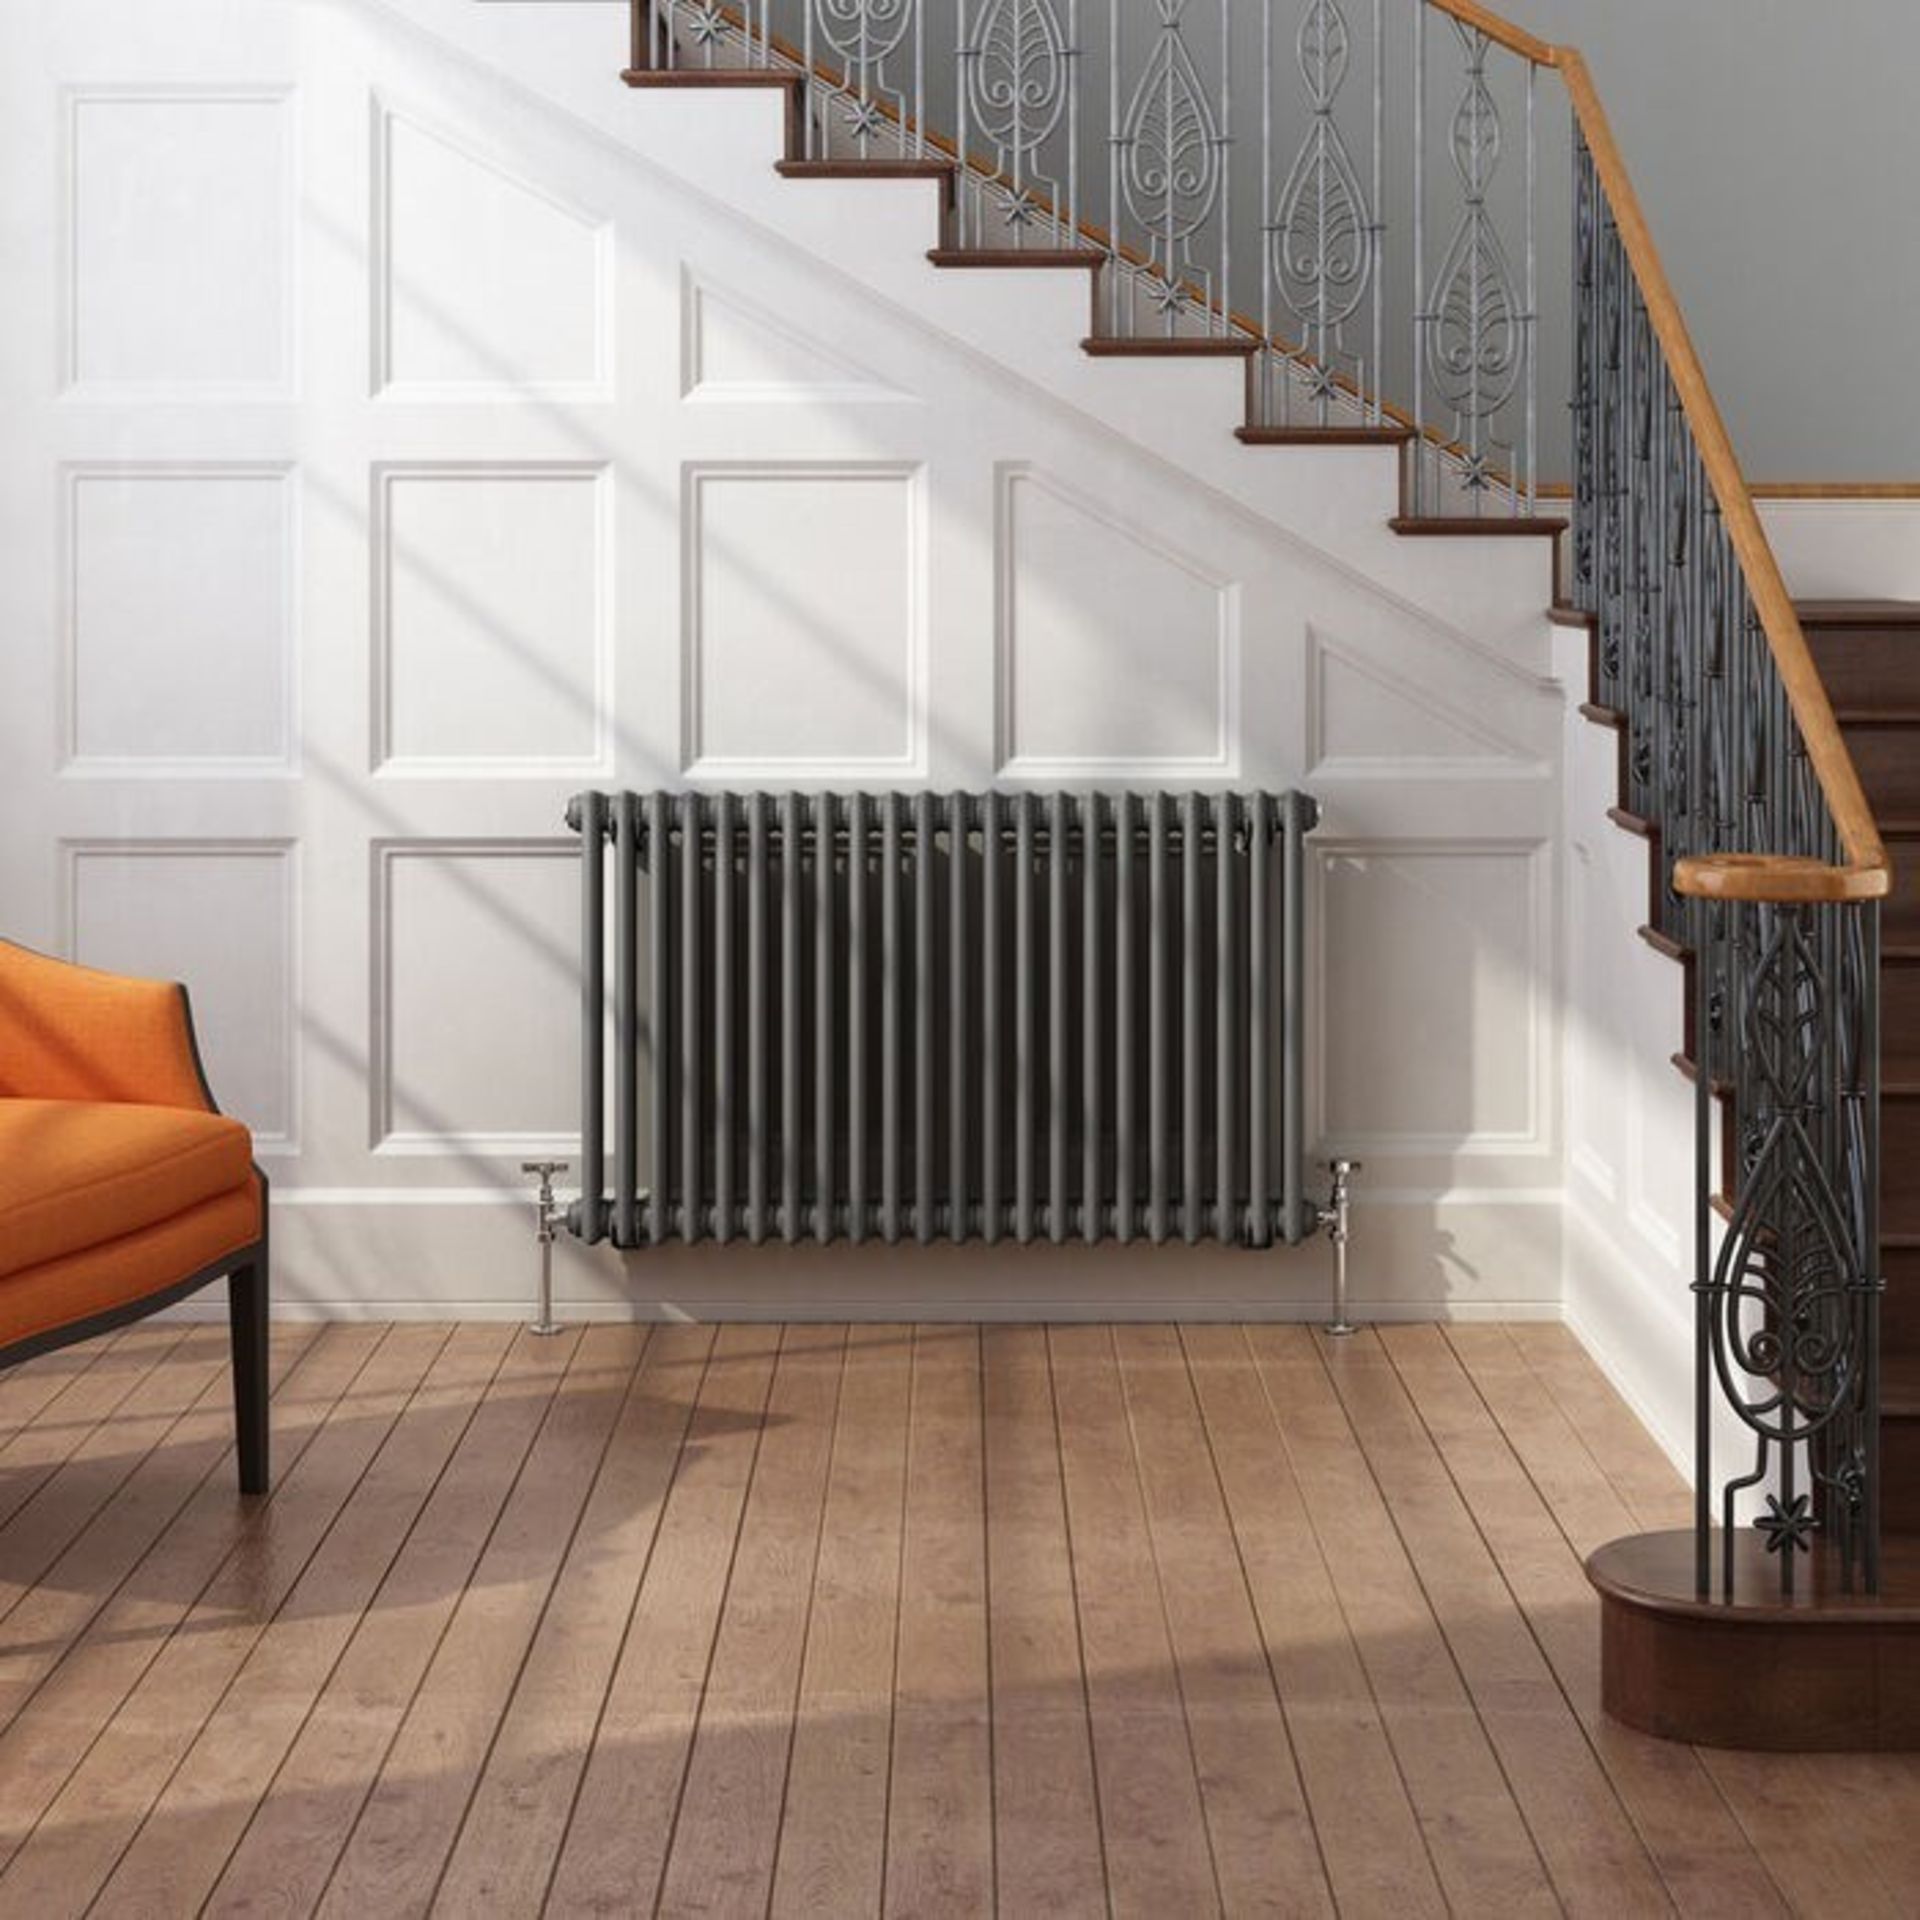 600x1008mm Anthracite Double Panel Horizontal Colosseum Traditional Radiator. RRP £549.99.RCA... - Image 2 of 3